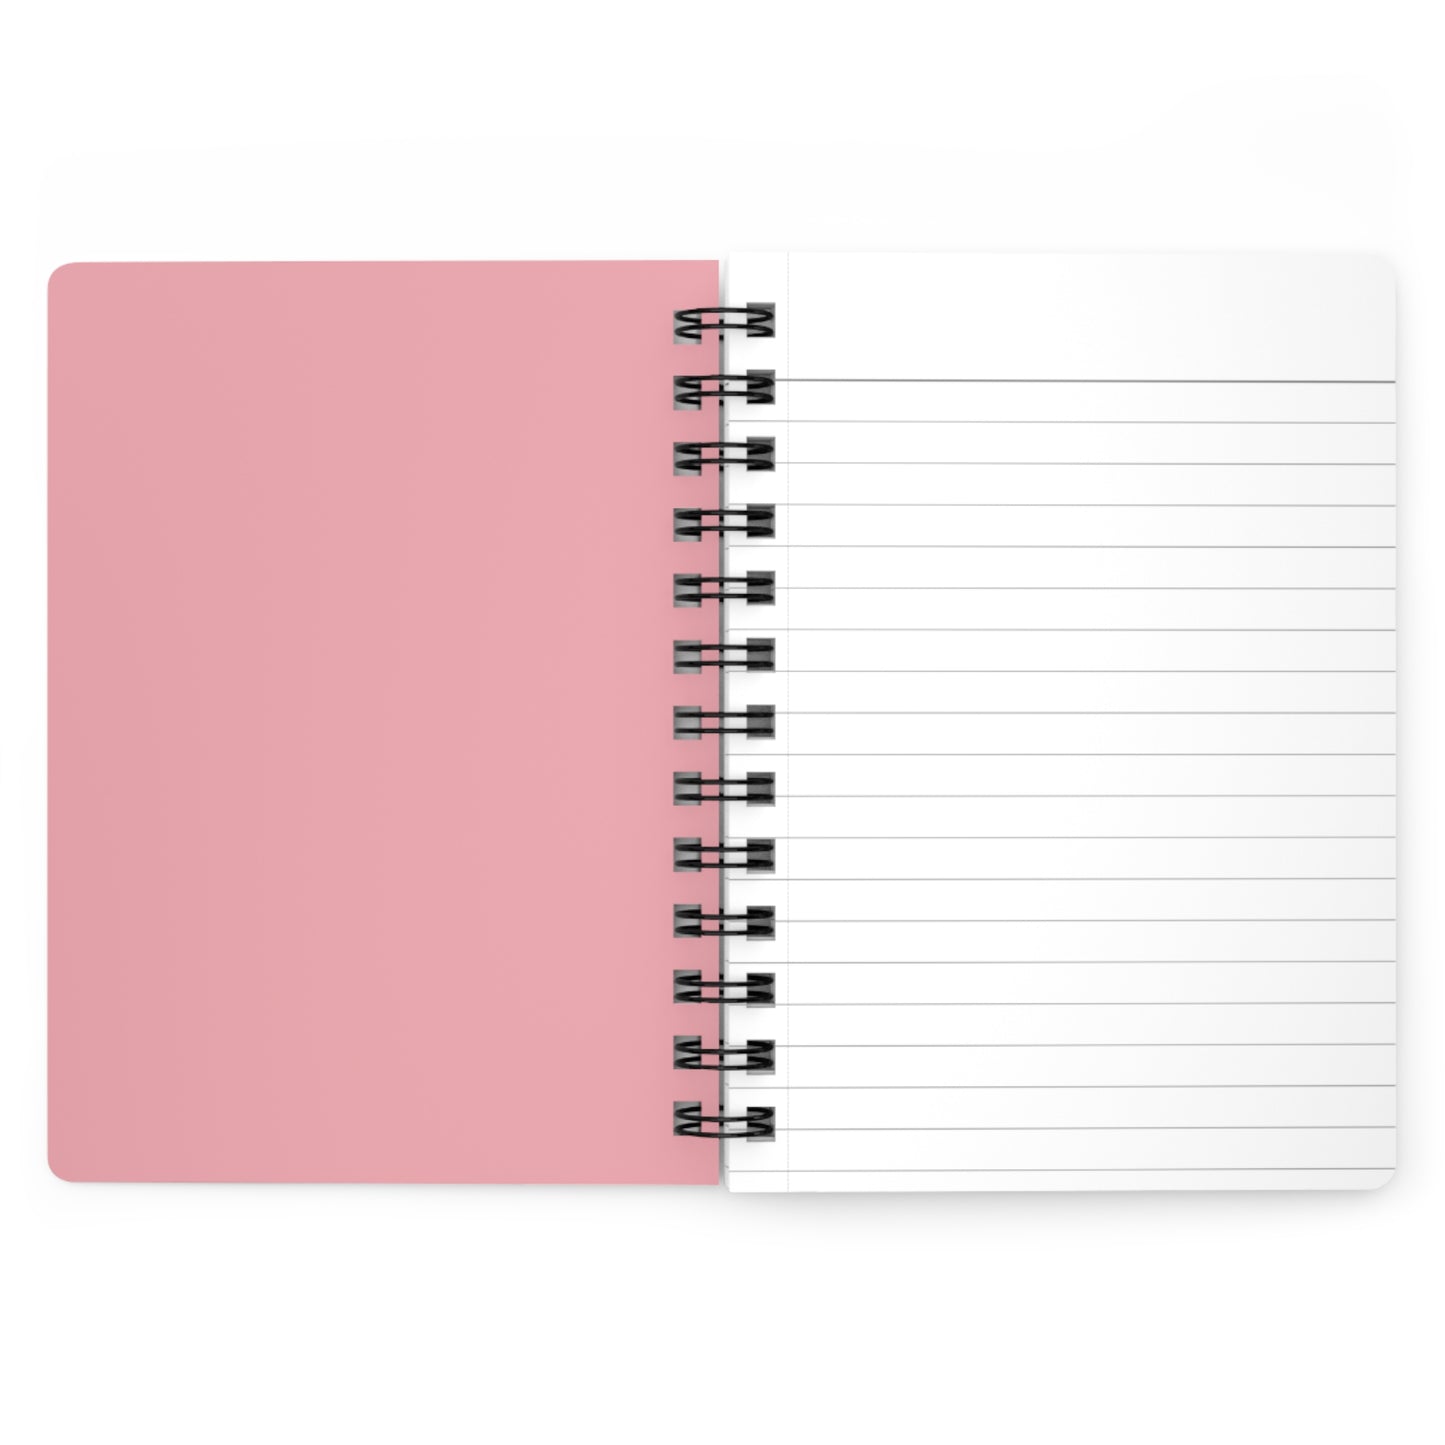 Cute Cat and Flowers Spiral Bound Journal